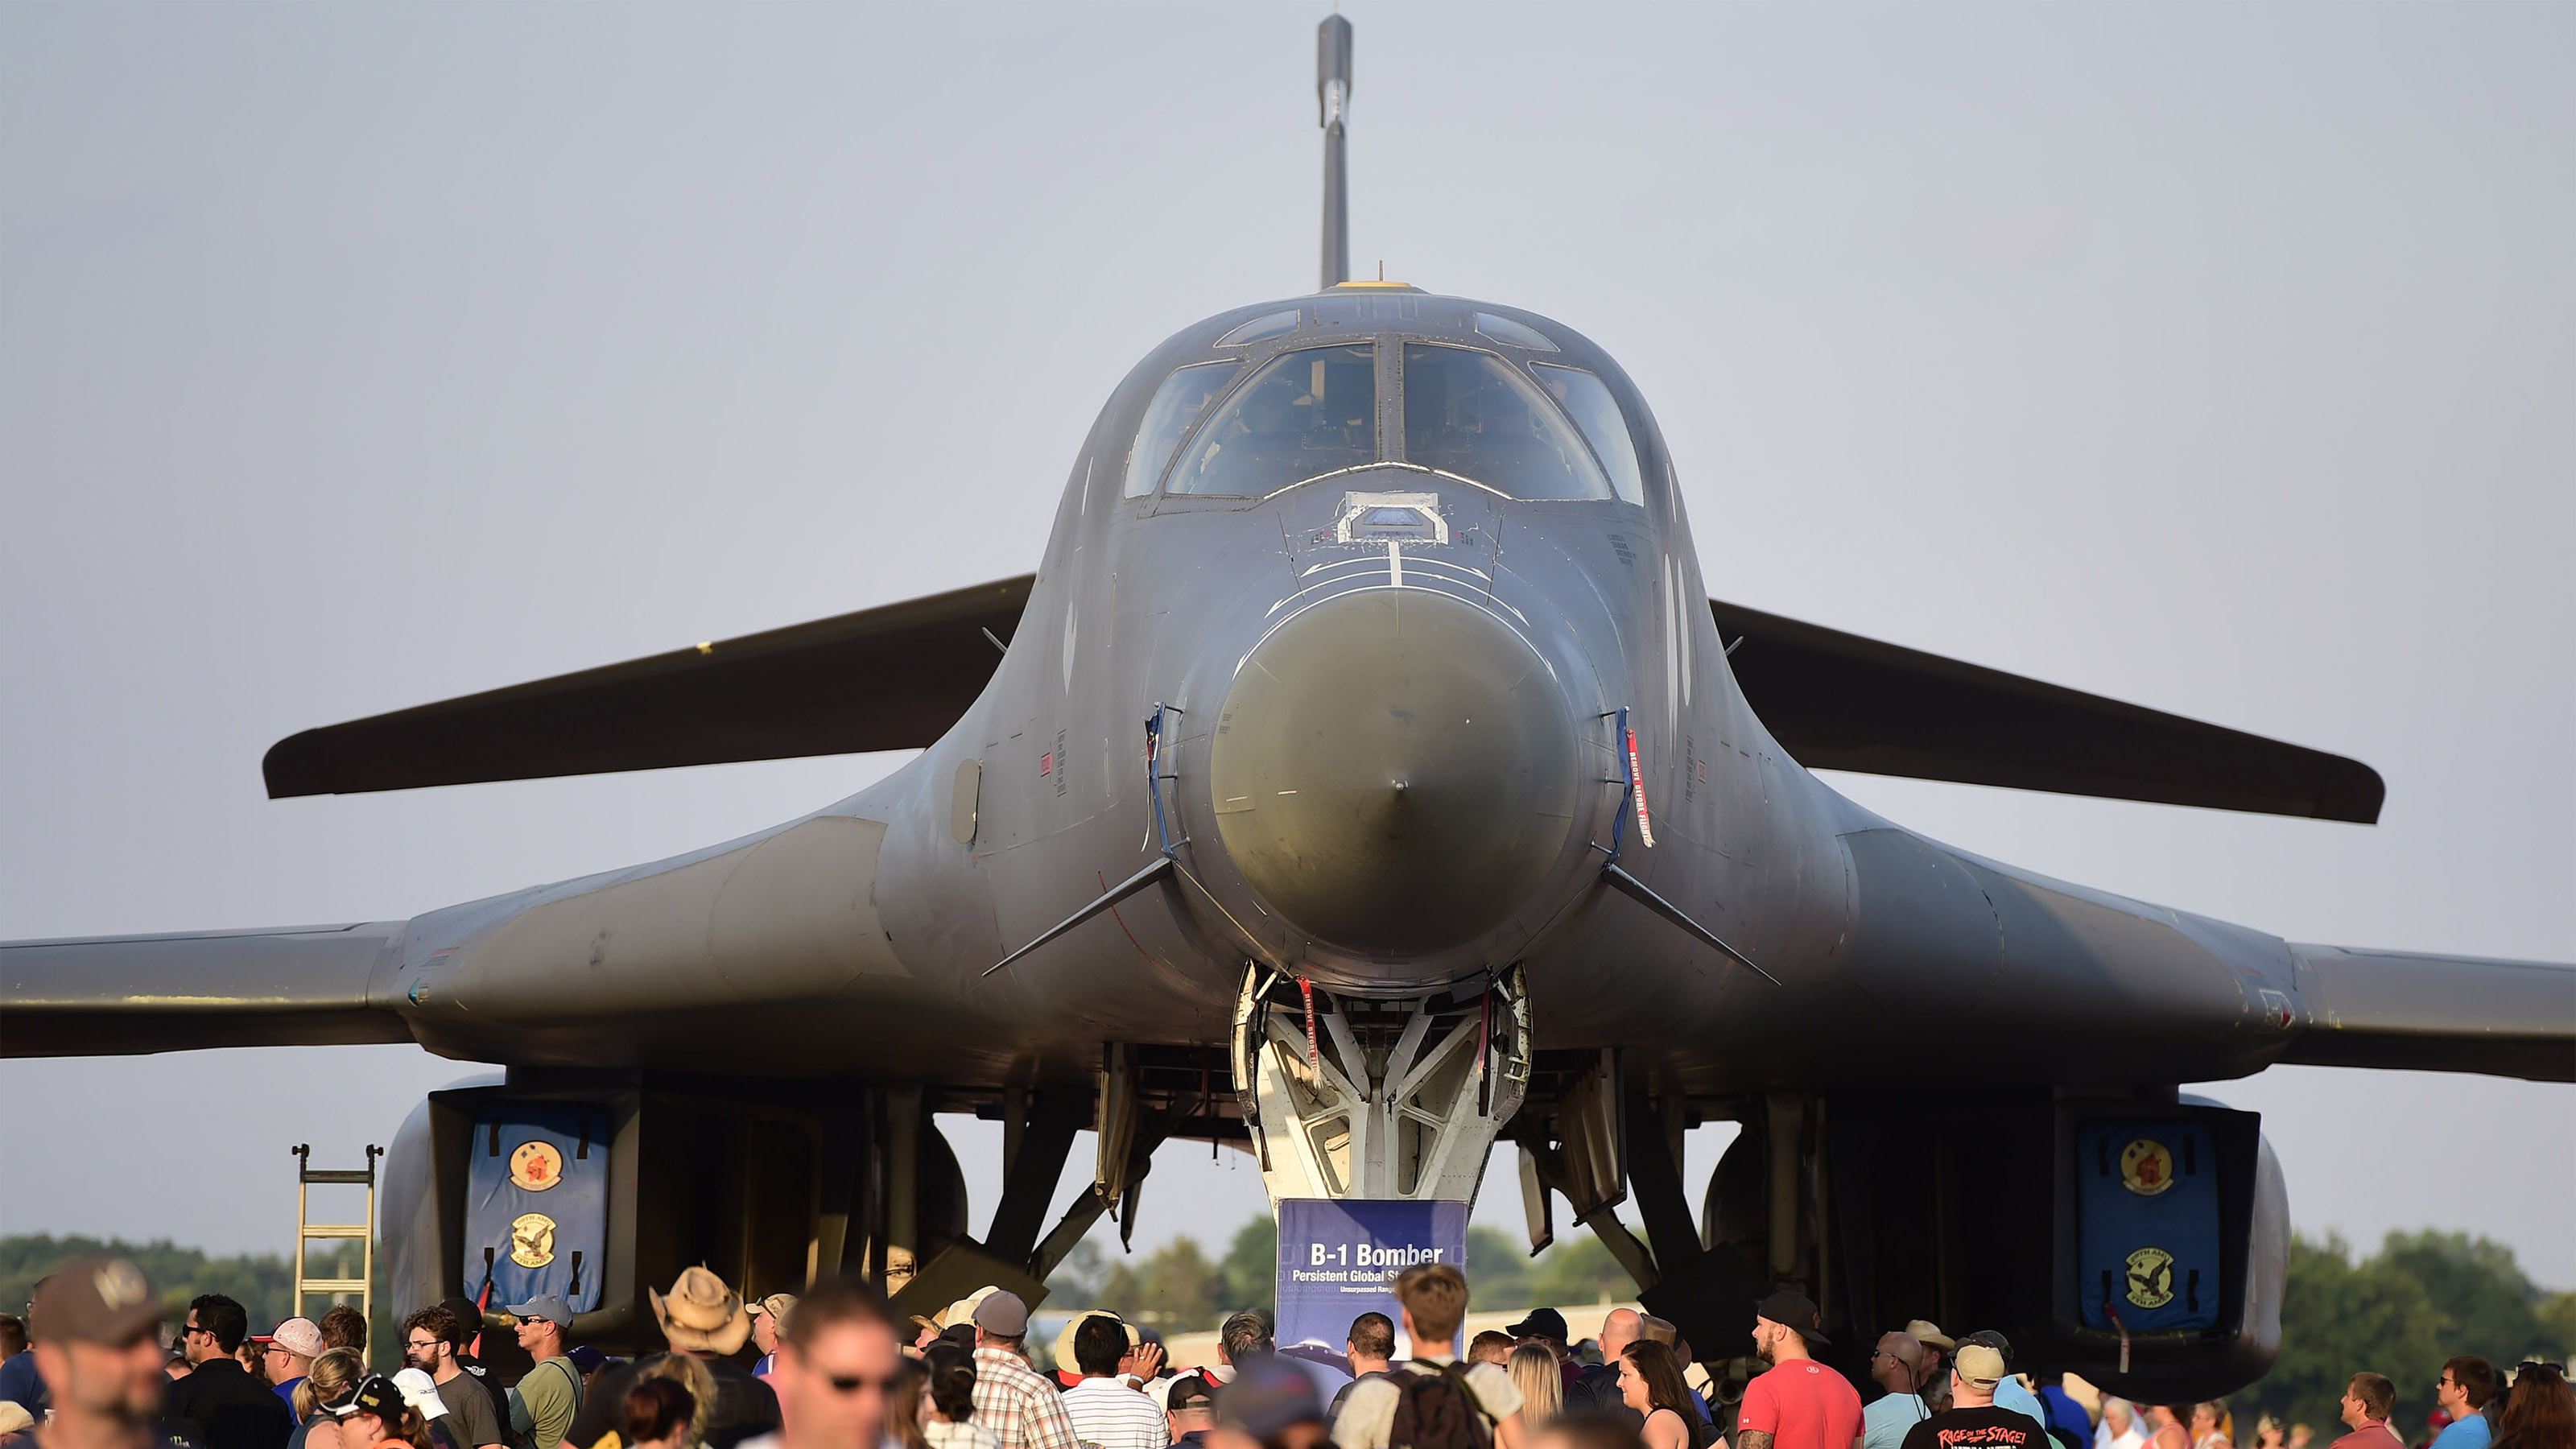 Military aircraft take AirVenture stage - AOPA